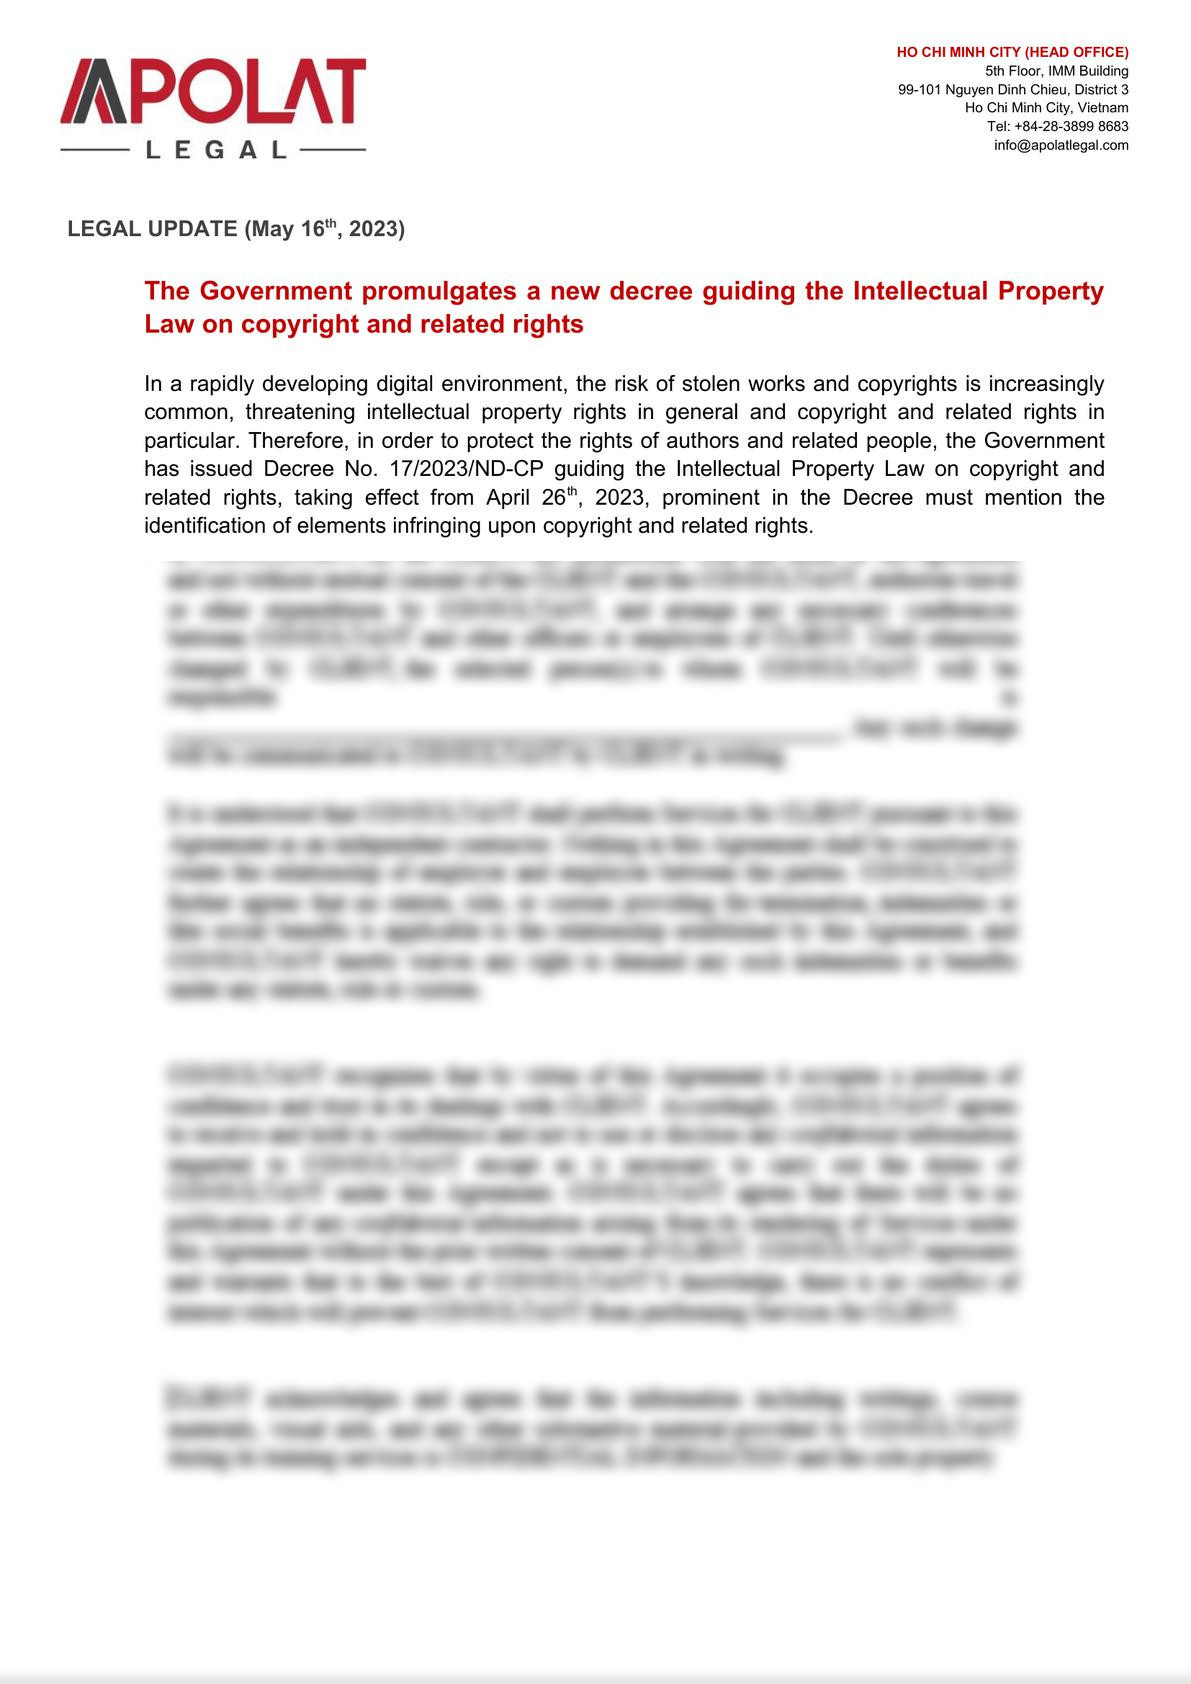 Legal update_a new decree guiding the Intellectual Property Law on copyright and related rights-0